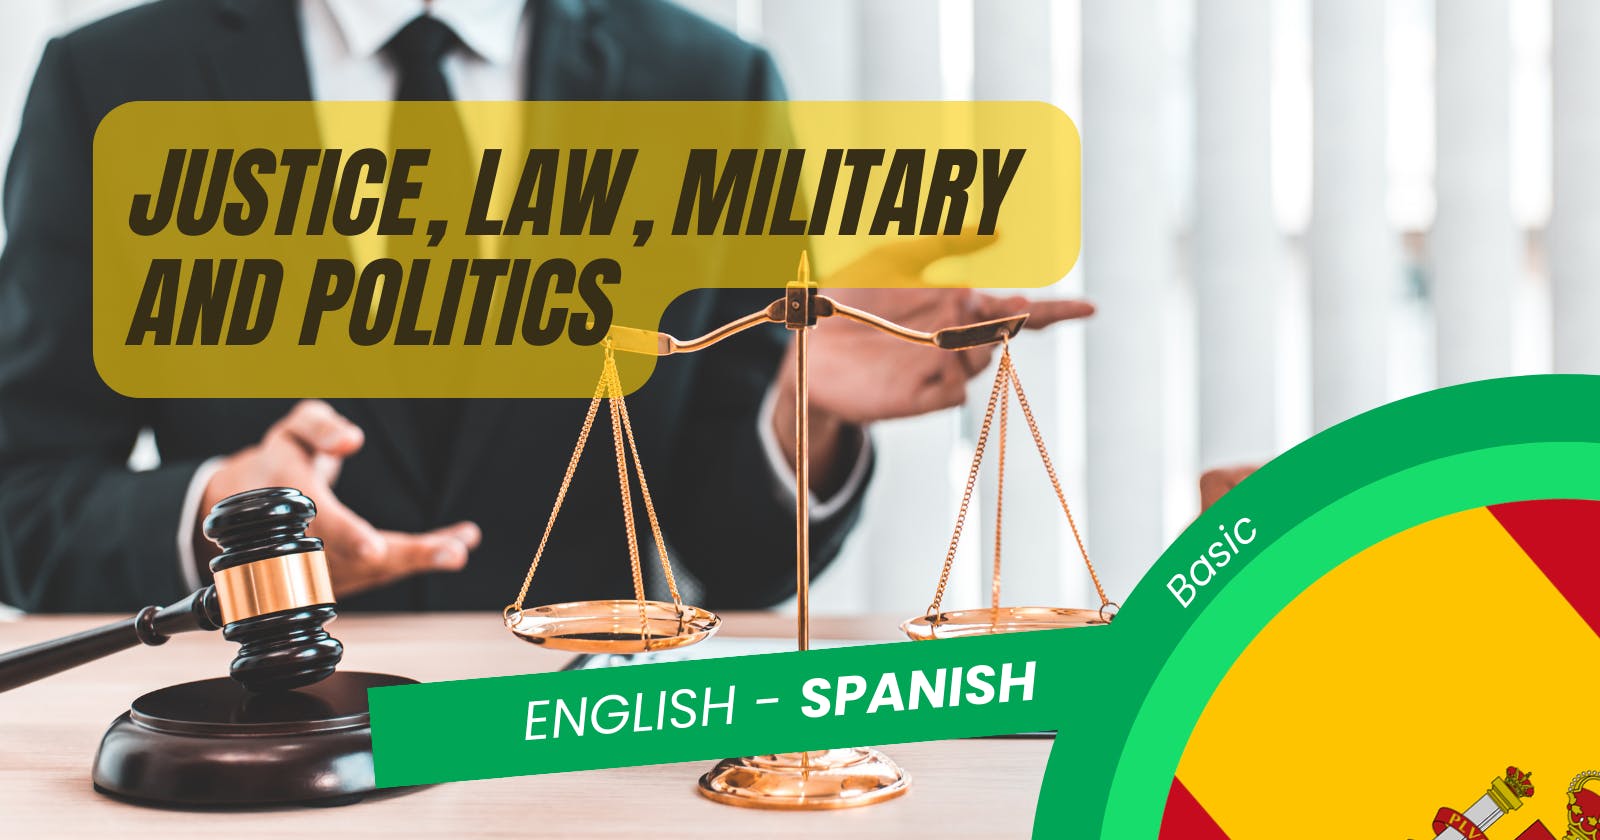 🇪🇸 Spanish Vocabulary for Beginners: Understanding Law and Politics